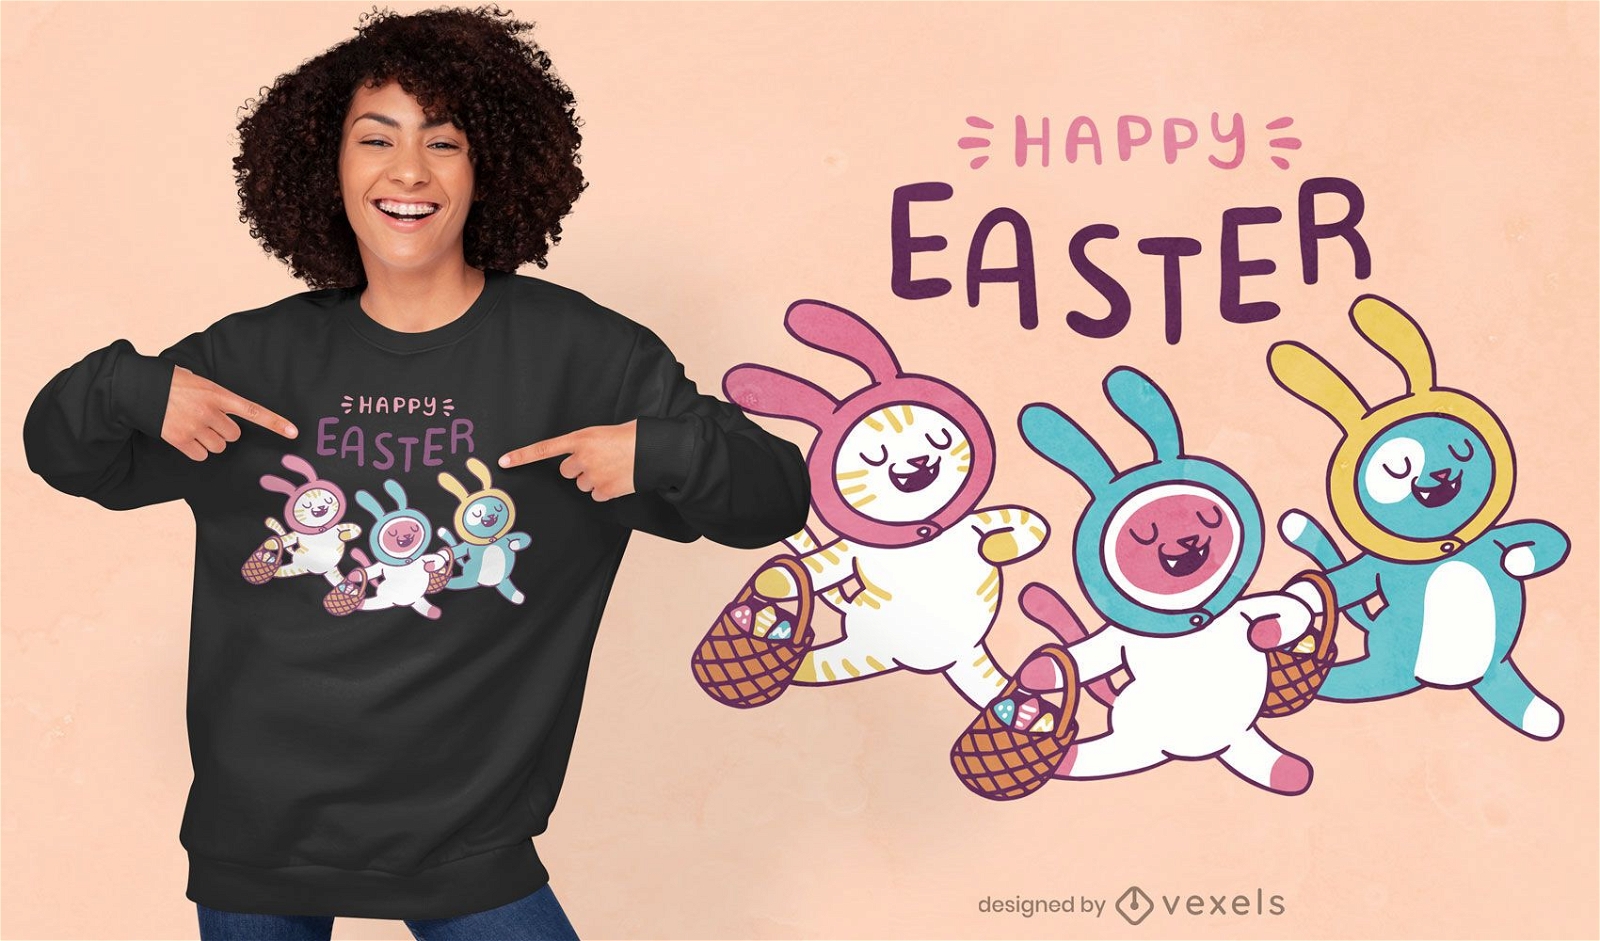 Easter kittens quote t-shirt design